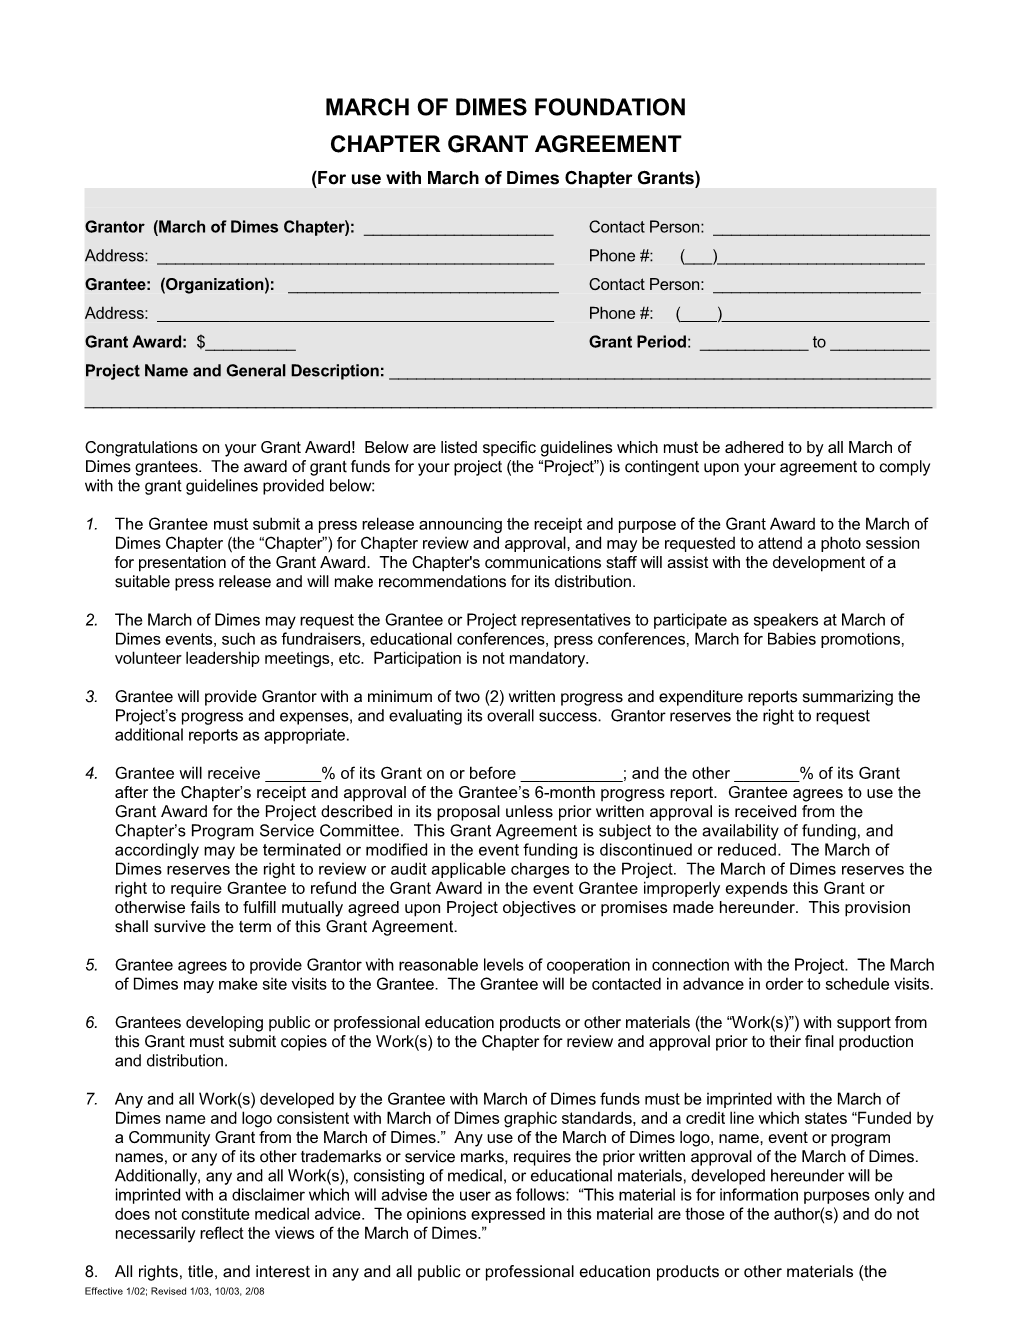 Agreement for Grantees Agreement